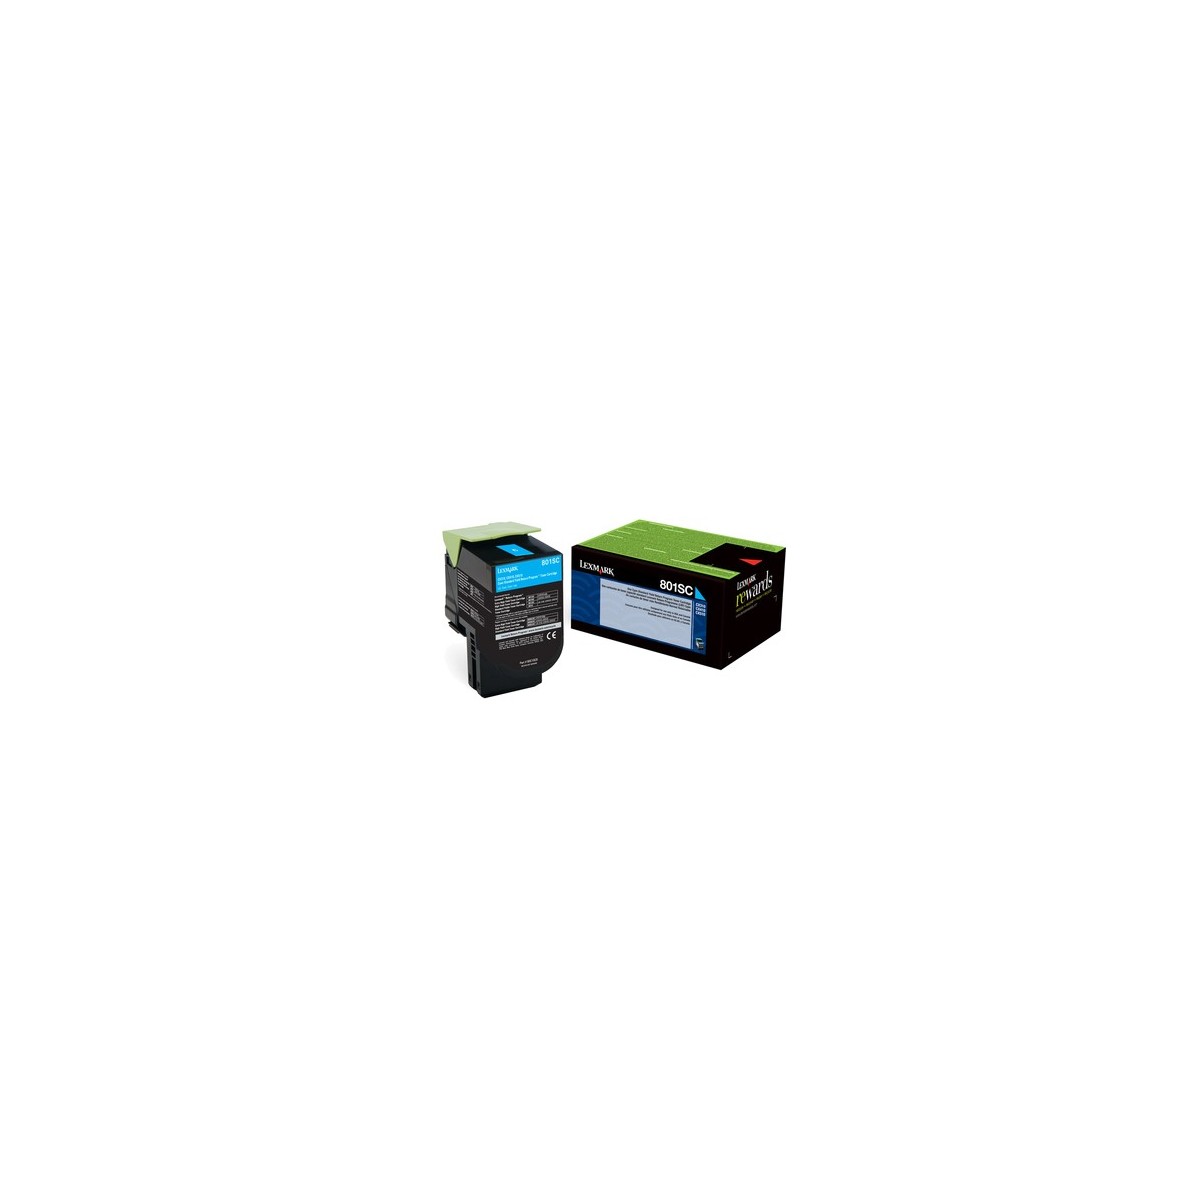 Lexmark 802SC - 2000 pages - Cyan - 1 pc(s)